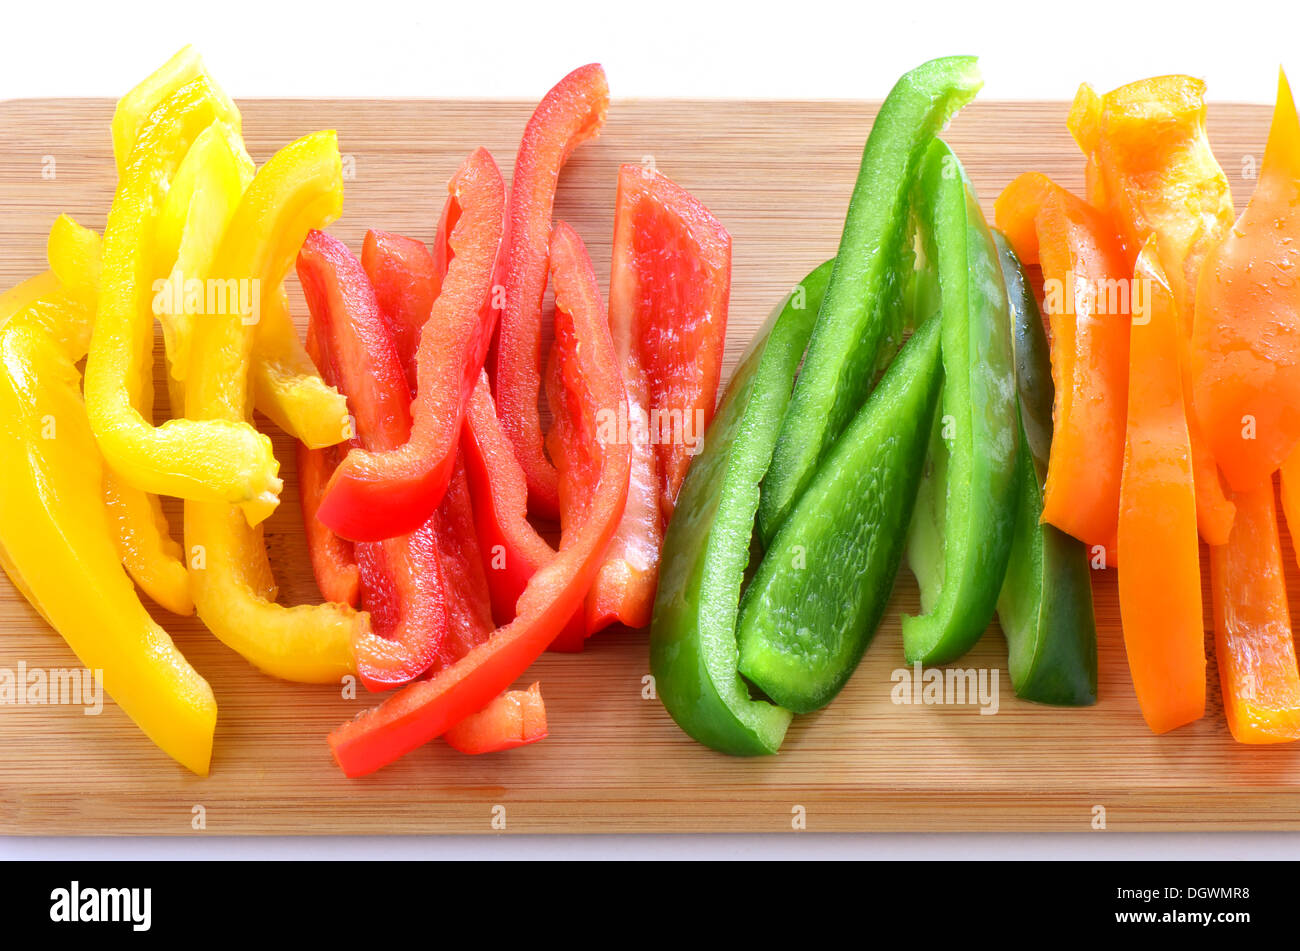 Sliced red, orange,green and yellow bell peppers ready for stir fry, appetizer, or salad Stock Photo